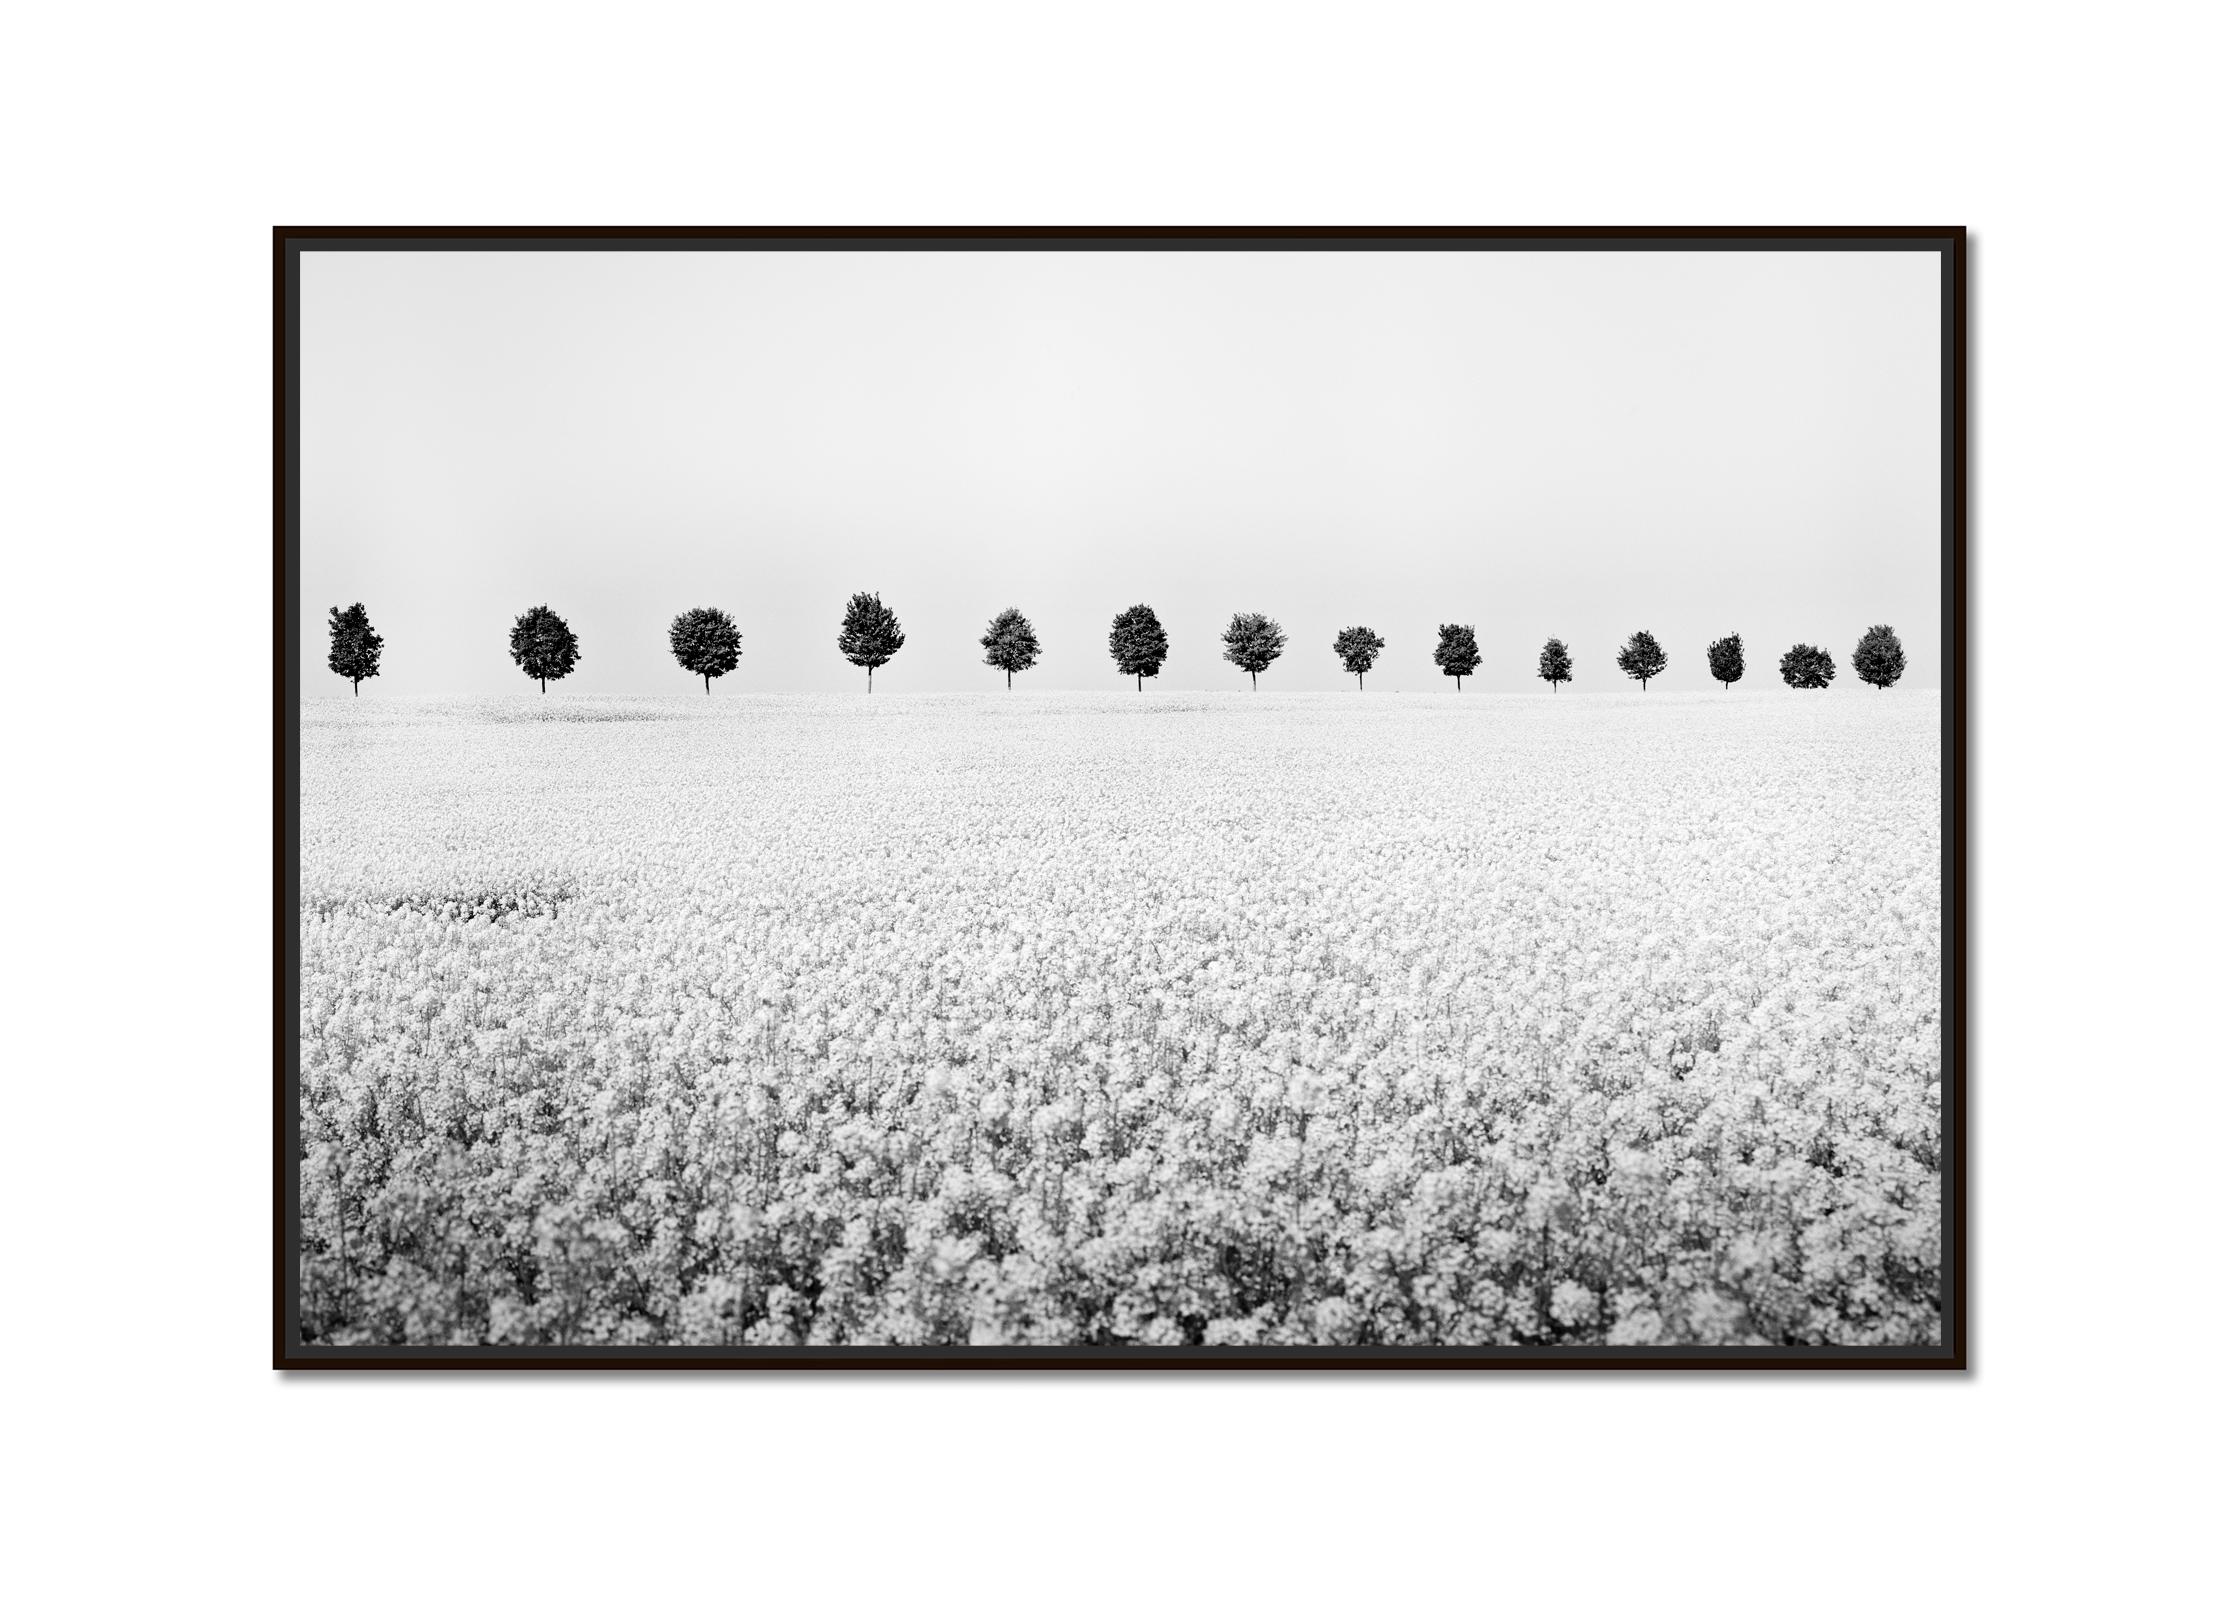 Brassica Napus row of trees black white minimalist landscape fineart photography - Photograph by Gerald Berghammer